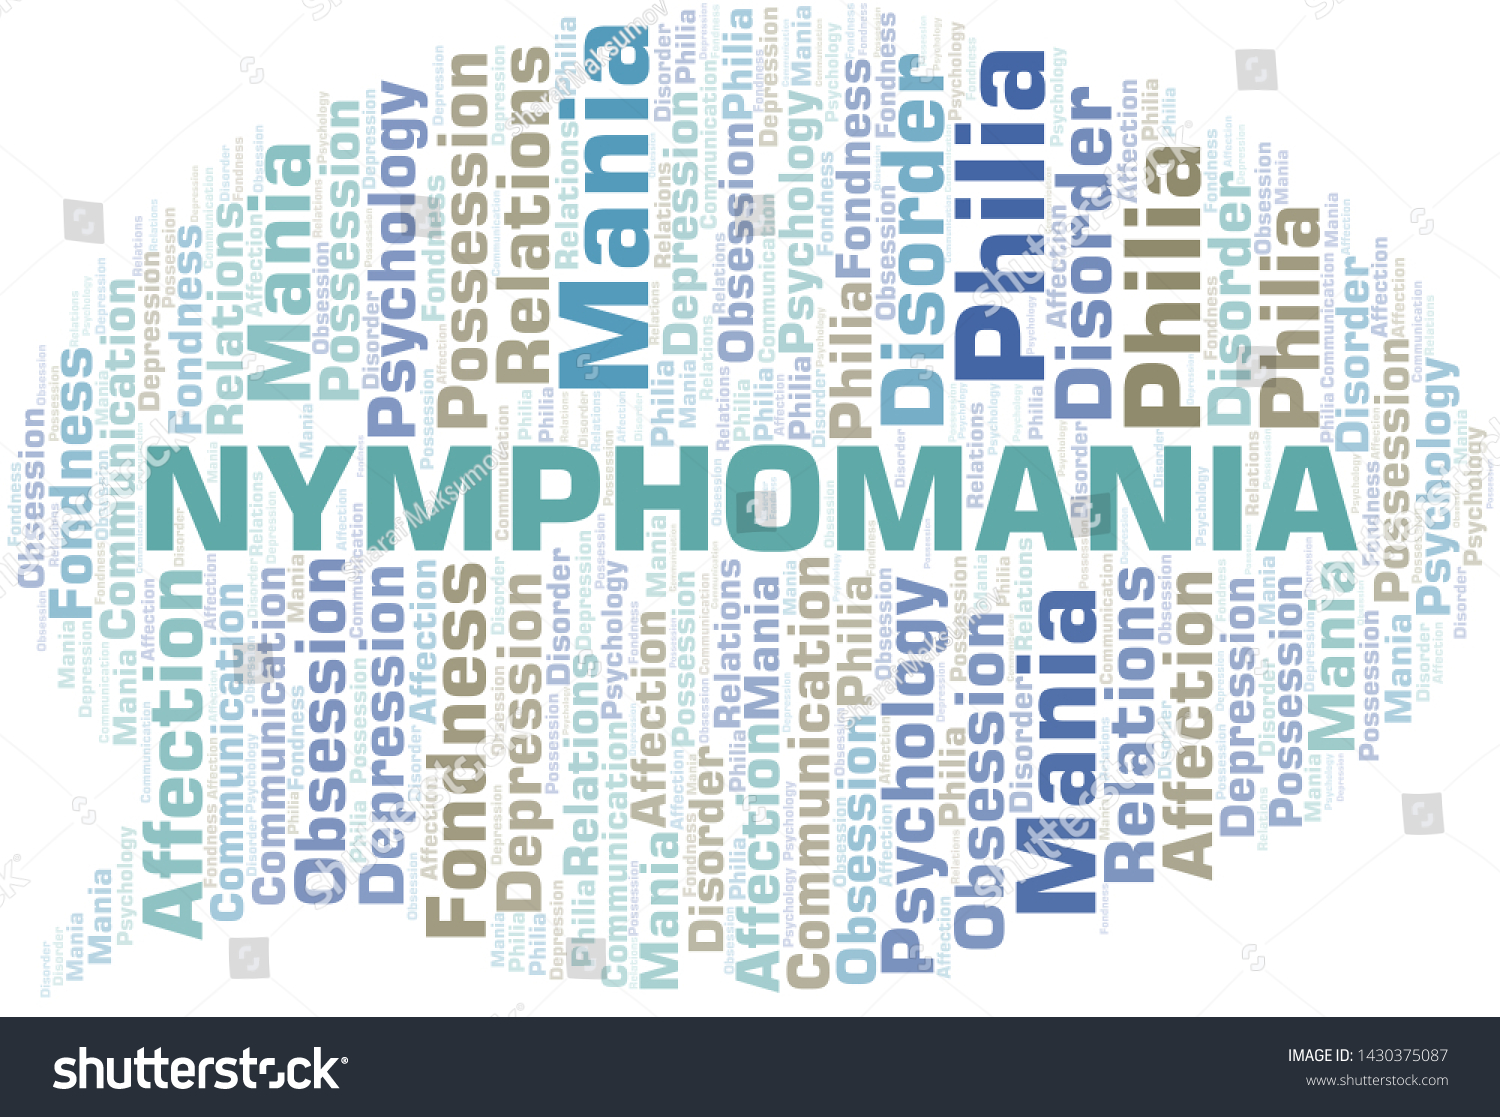 Nymphomania Word Cloud Type Mania Made Stock Vector Royalty Free 1430375087 Shutterstock 